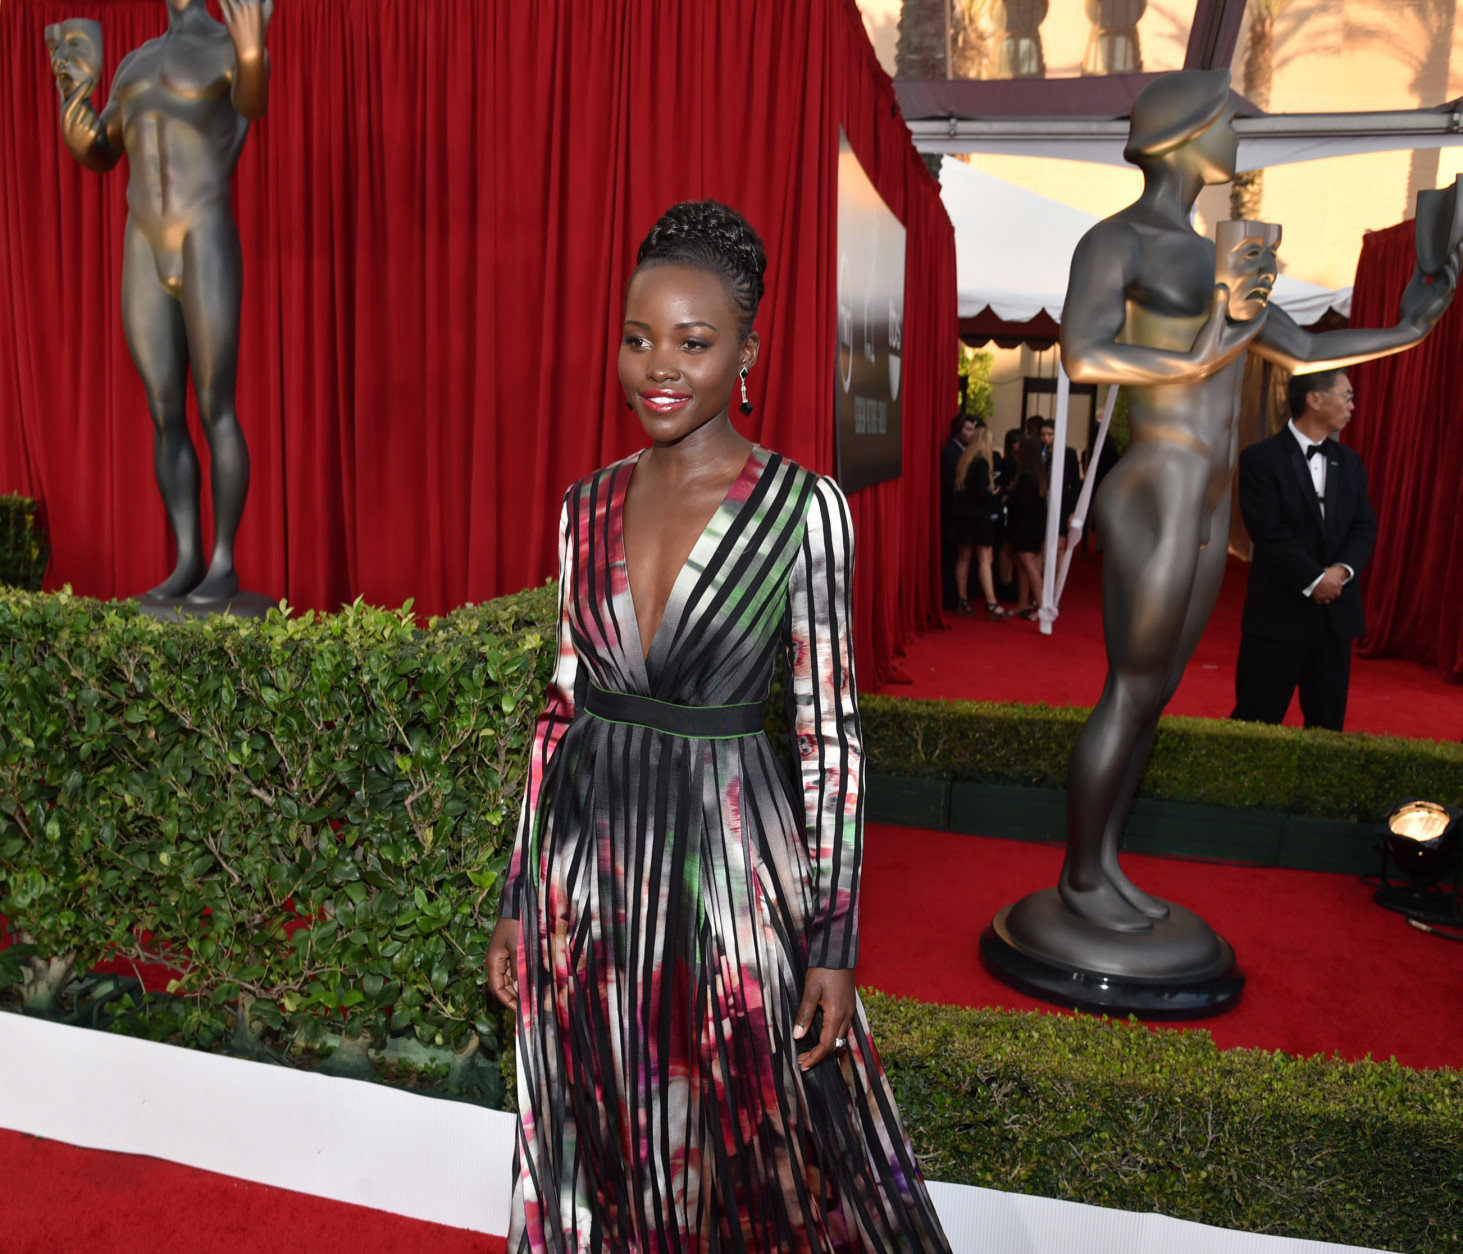 Lupita Nyong'o arrives at the 21st annual Screen Actors Guild Awards at the Shrine Auditorium on Sunday, Jan. 25, 2015, in Los Angeles. (Photo by John Shearer/Invision/AP)